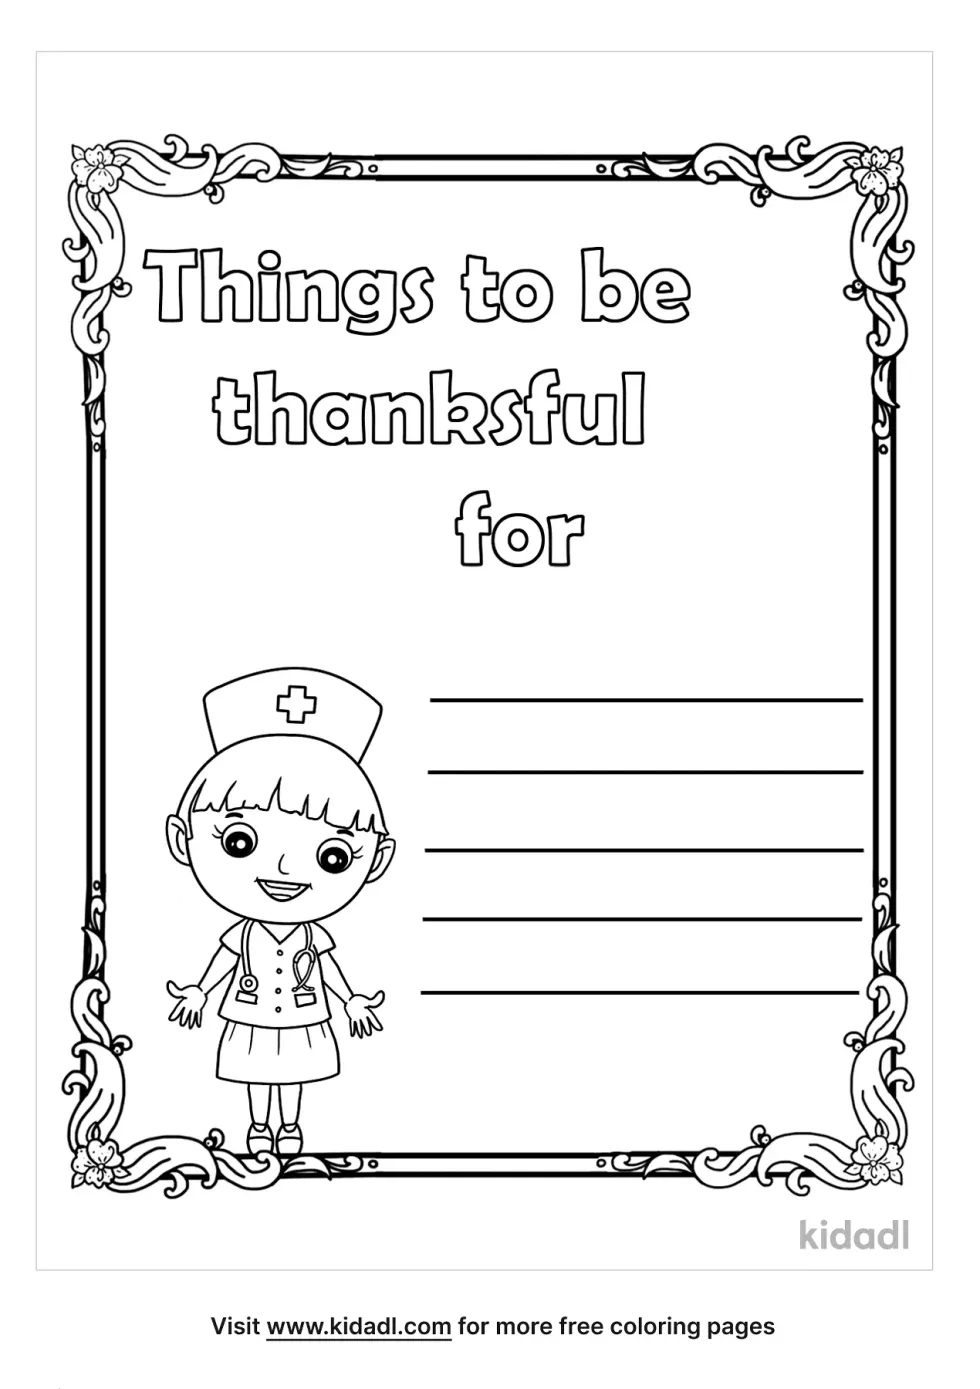 Things To Be Thankful For